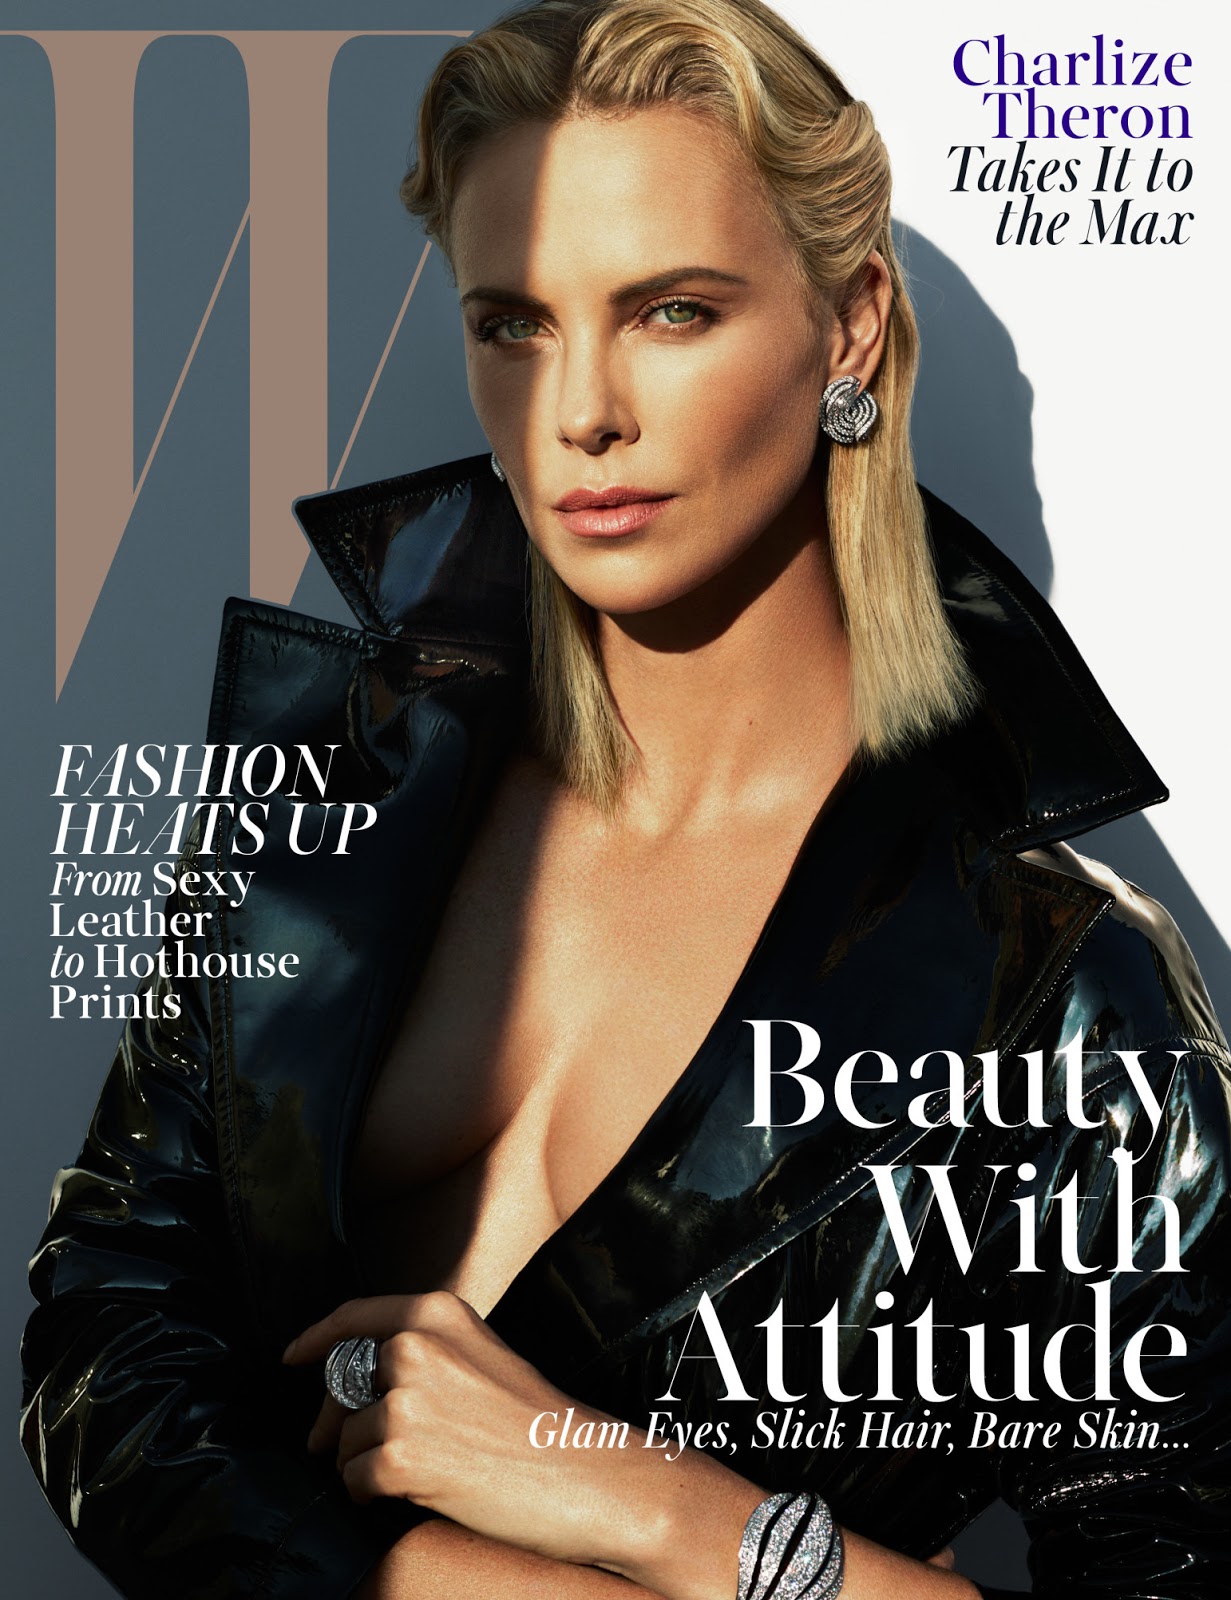 Charlize Theron in W Magazine May 2015 by Mert & Marcus